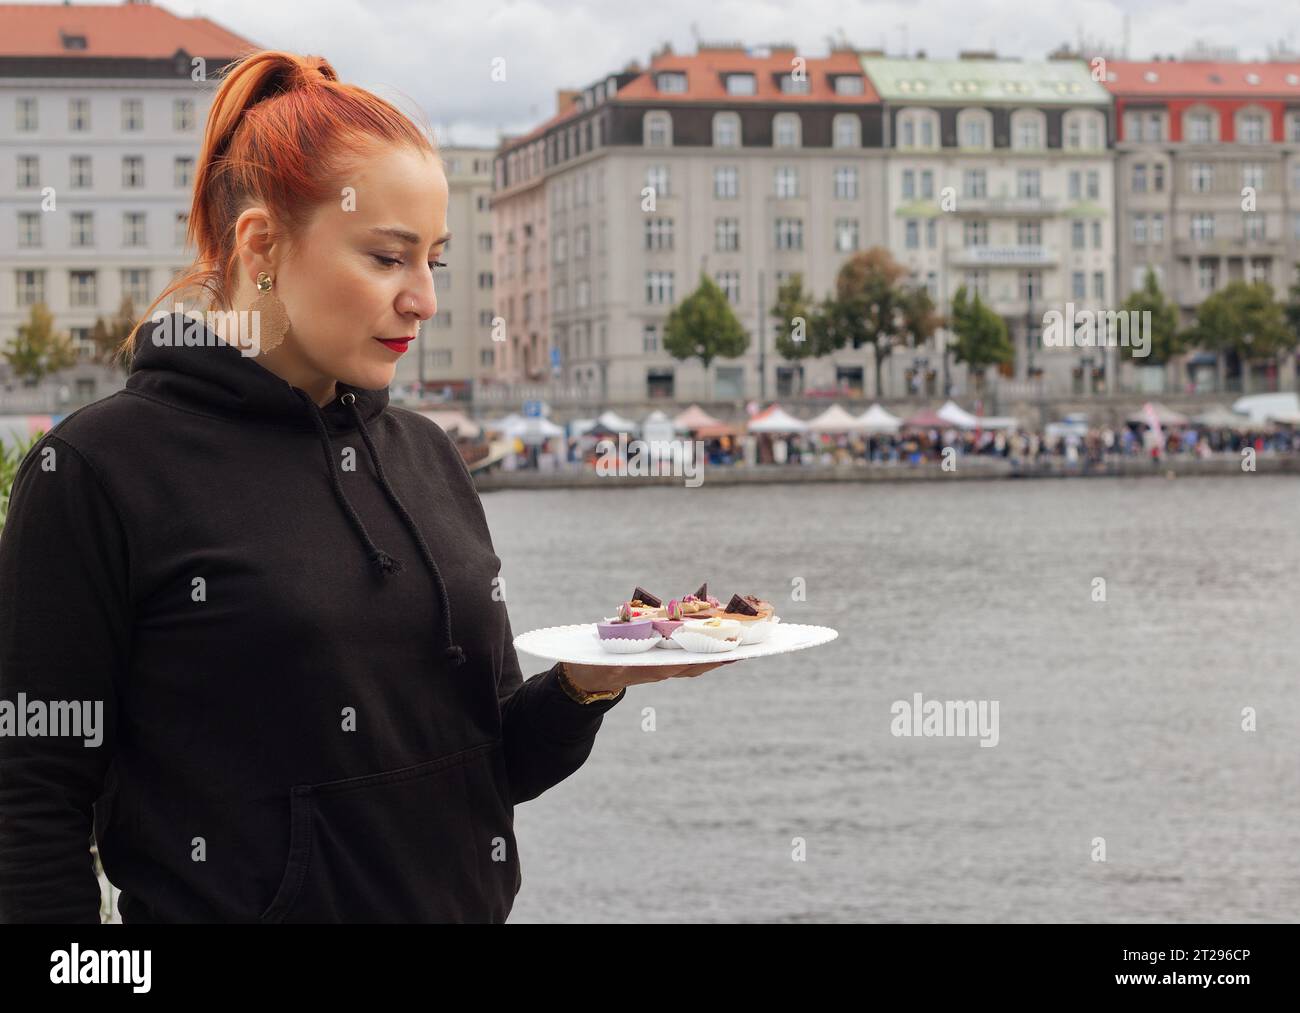 A pretty young woman, a stallholder at a Prague street market, showing off her wares, delicious cheesecake desserts. Stock Photo